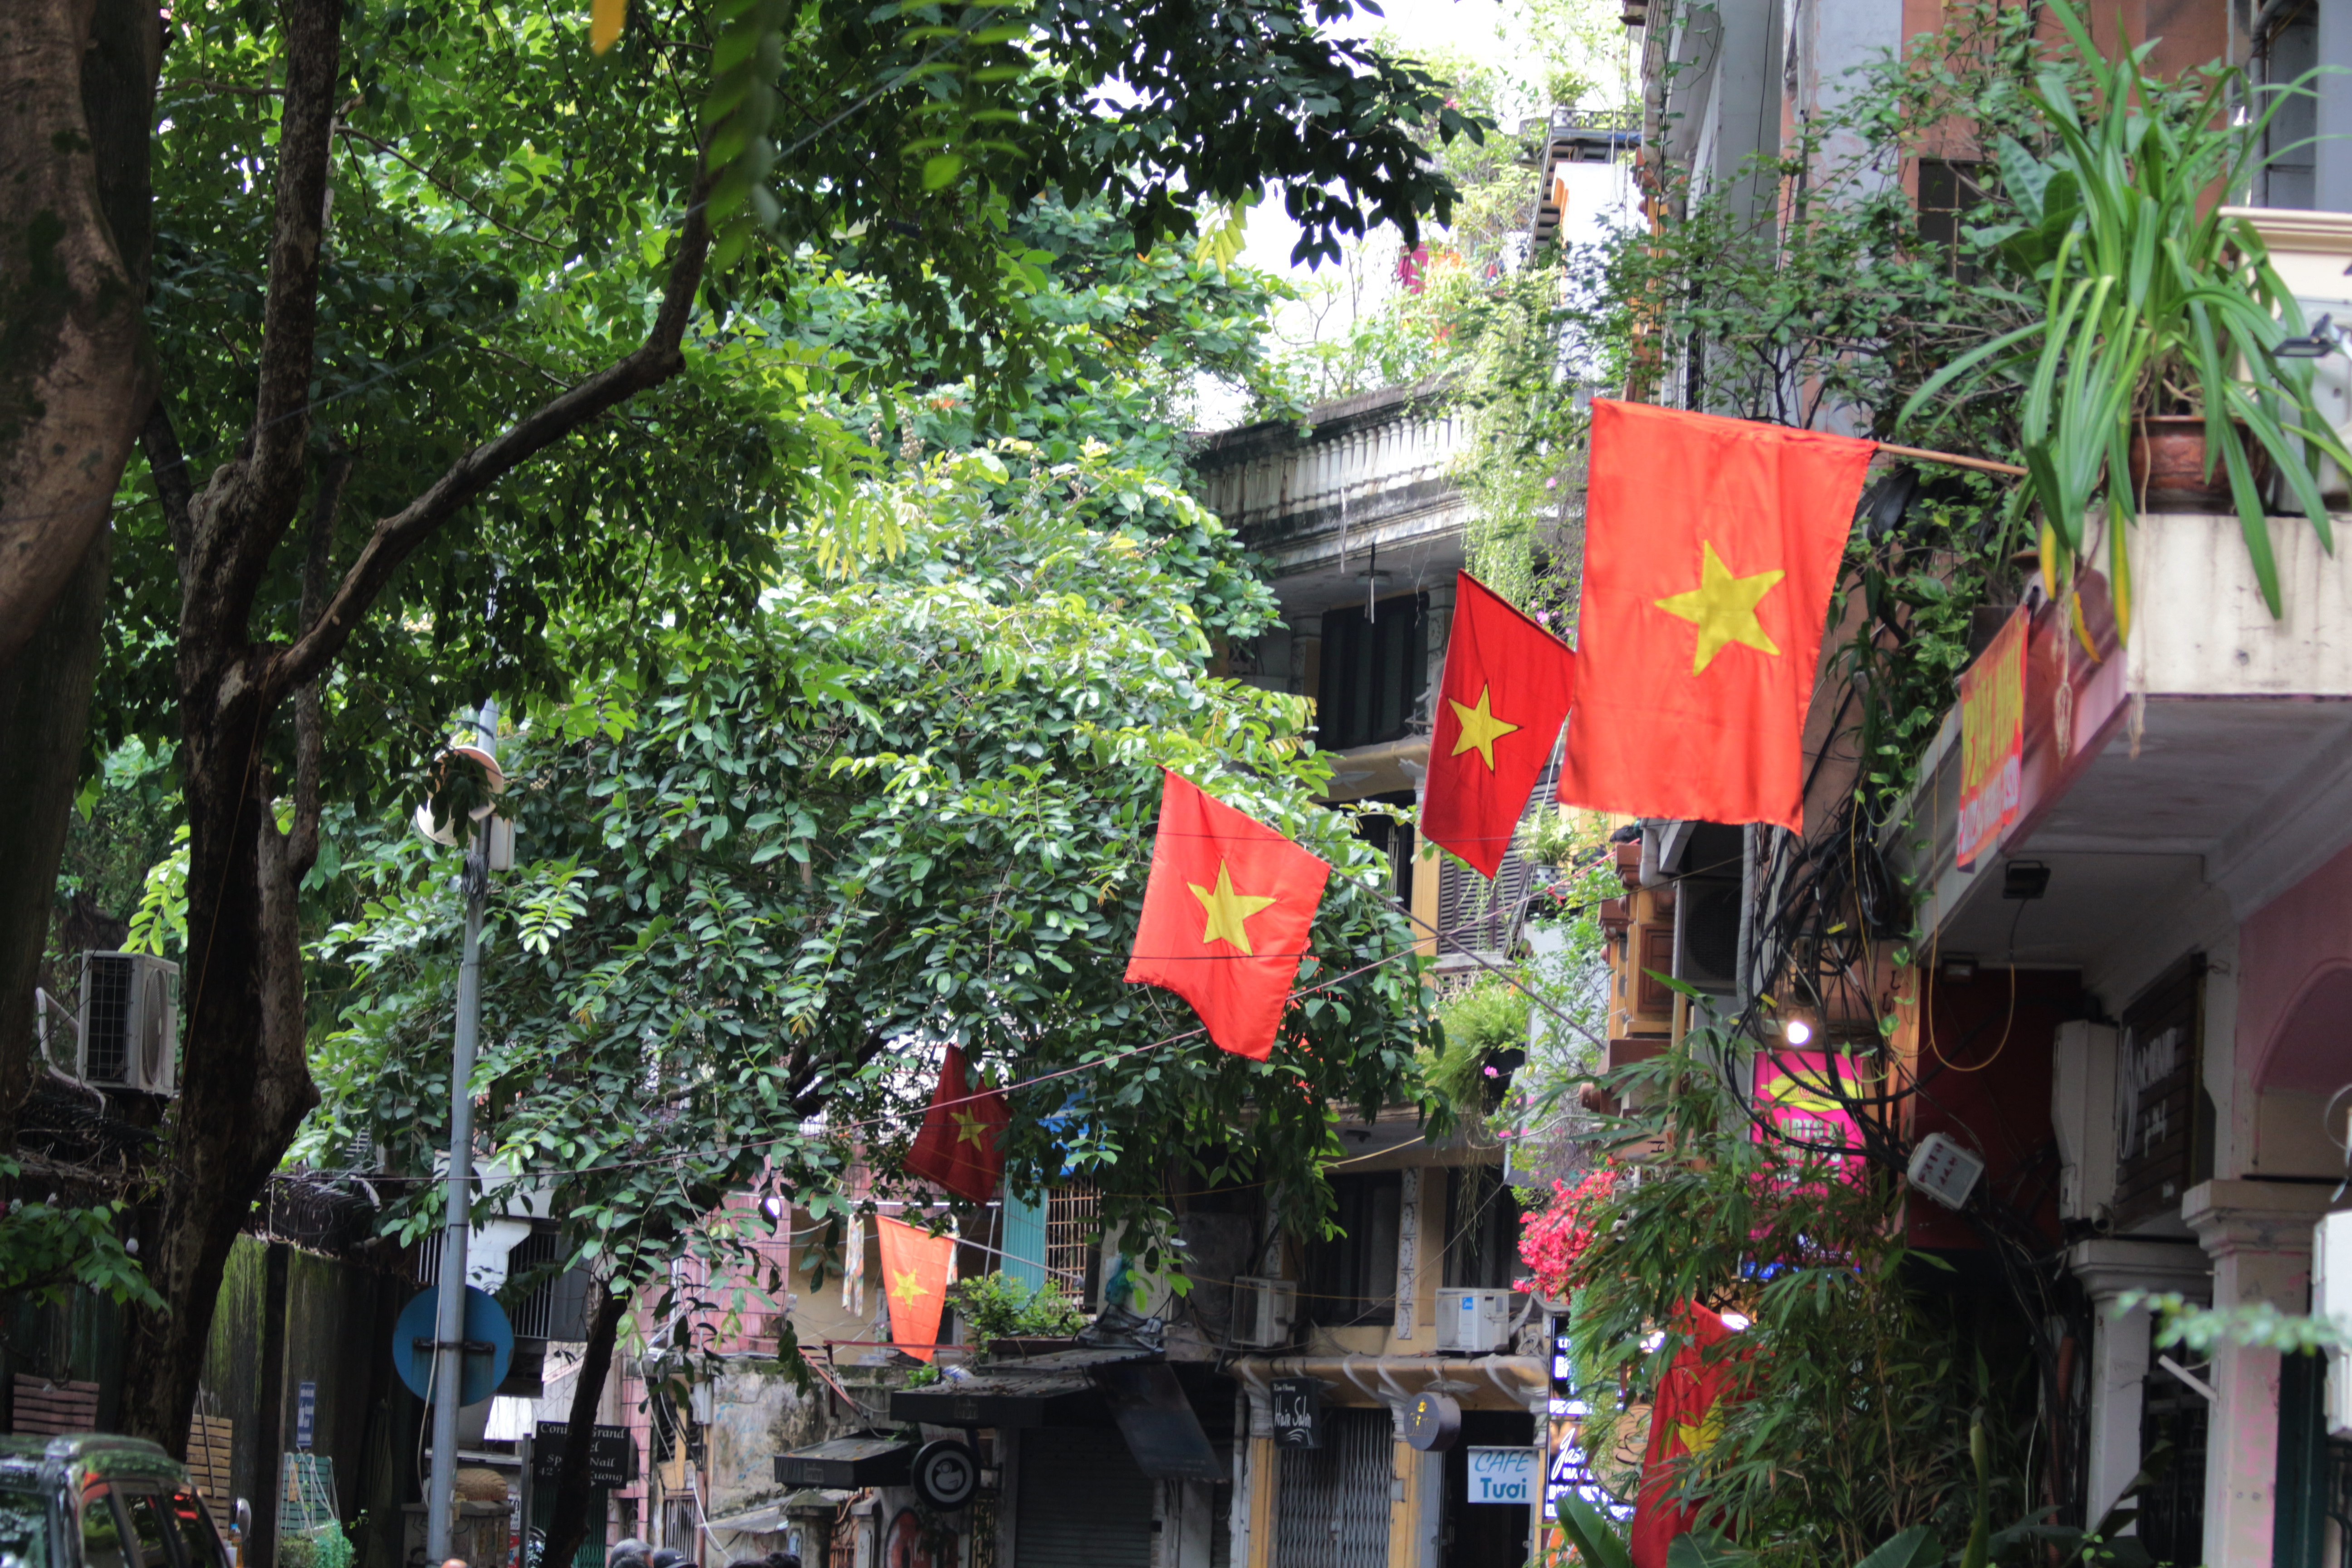 Back to basics: Why I chose to move to Vietnam